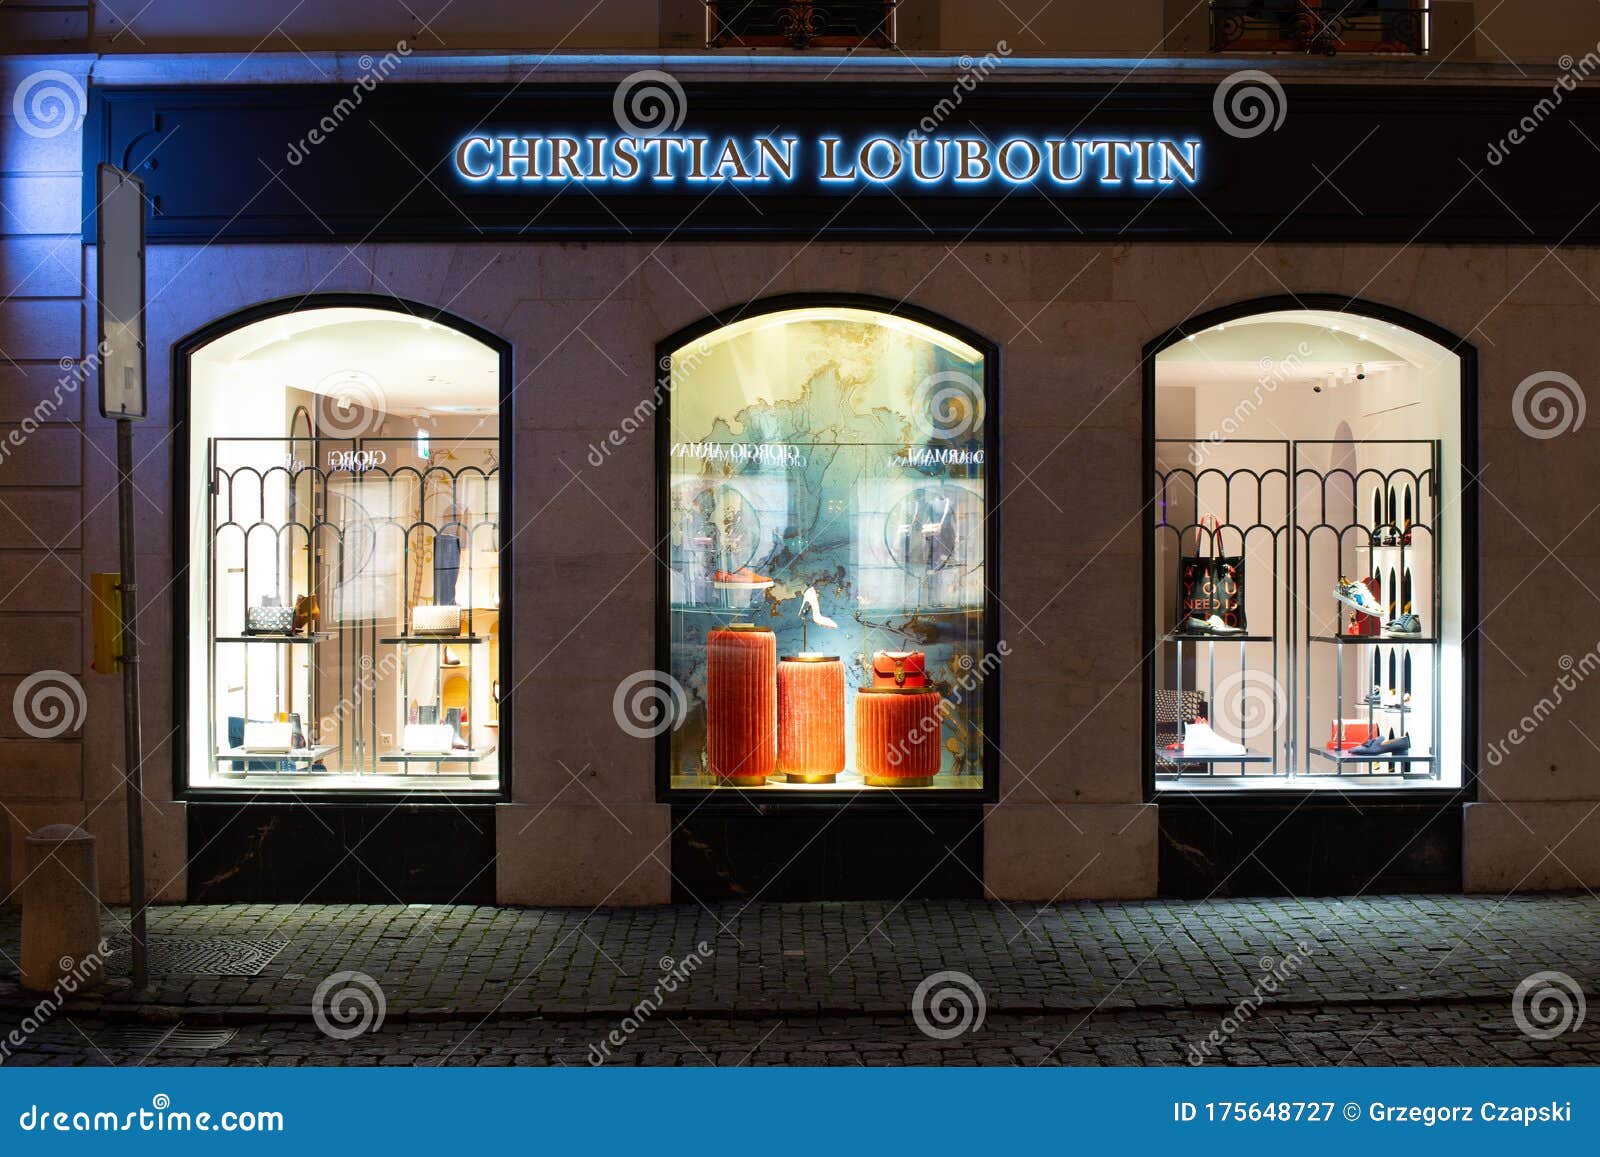 Christian Louboutin Window Store, Shoe with High-end Stiletto Footwear, on for Sale, Exposition Editorial Photography - Image of business, city: 175648727